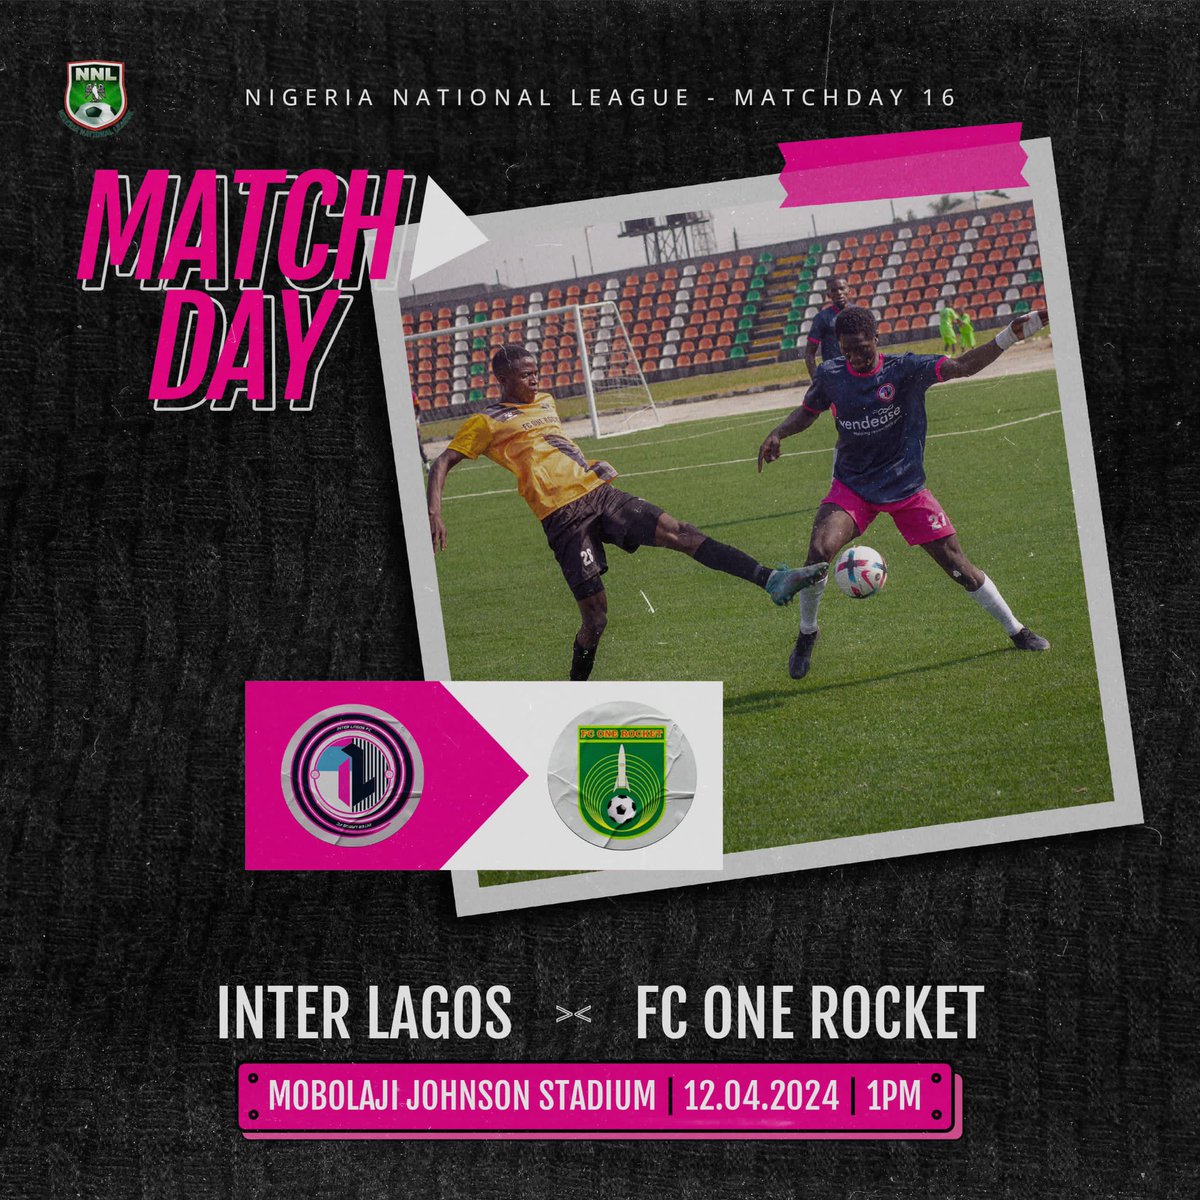 MatchDay 16 is here!! Let’s Go InterLagos ⚽️🪁